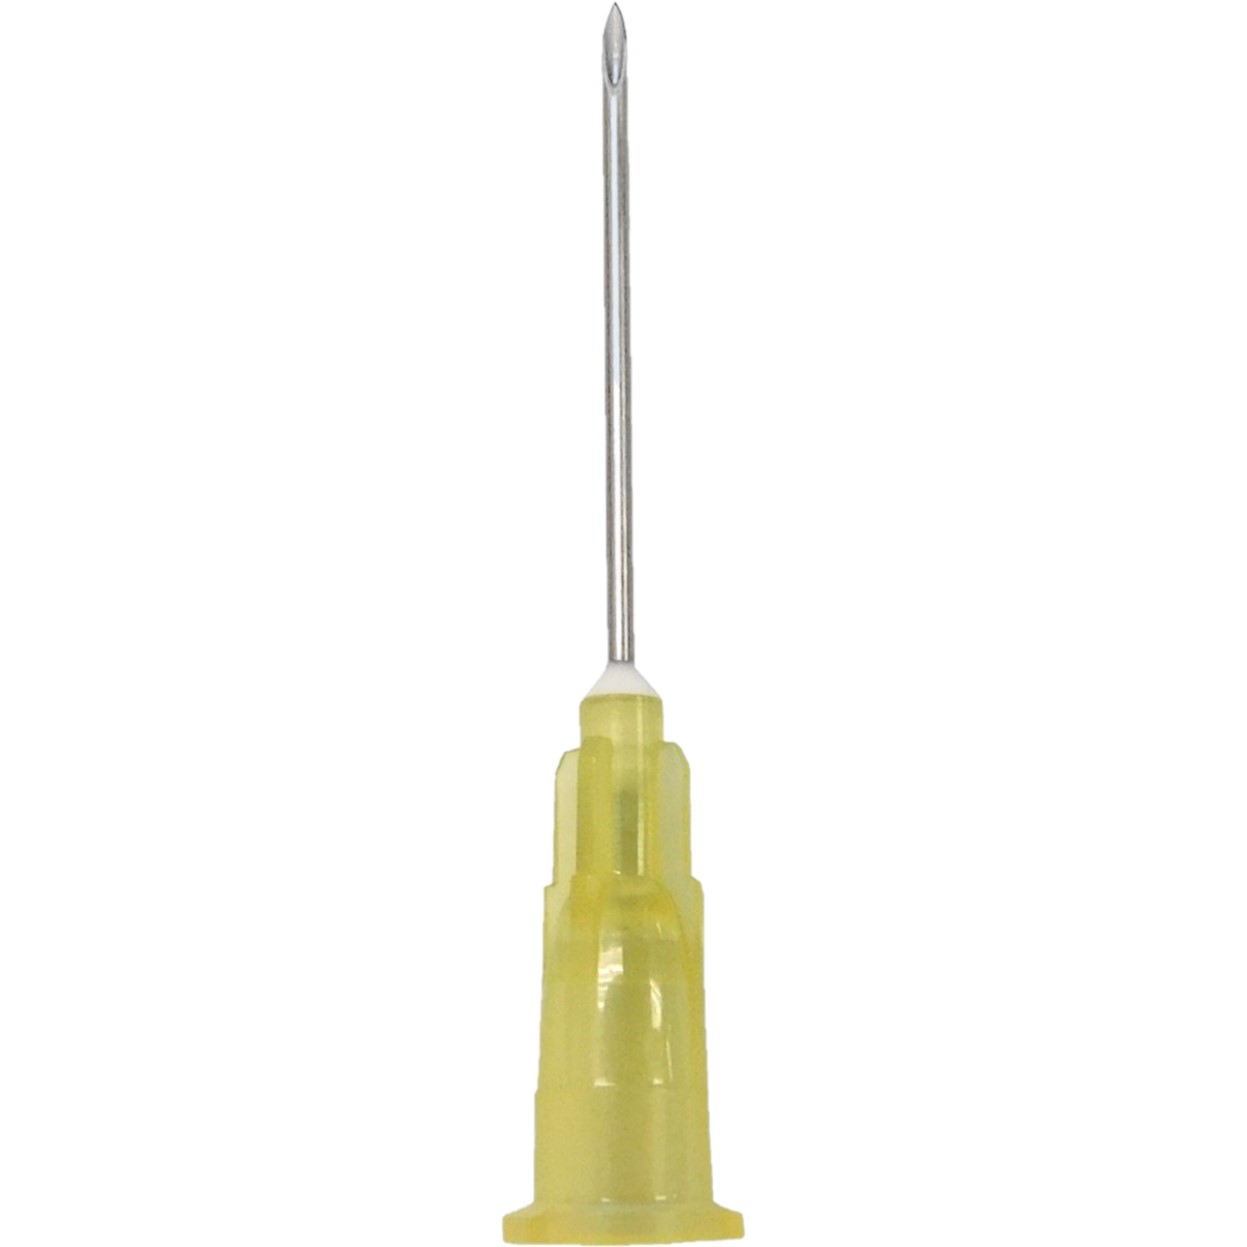 Needle Hypodermic Without Safety 20 Gauge 1 Inch .. .  .  